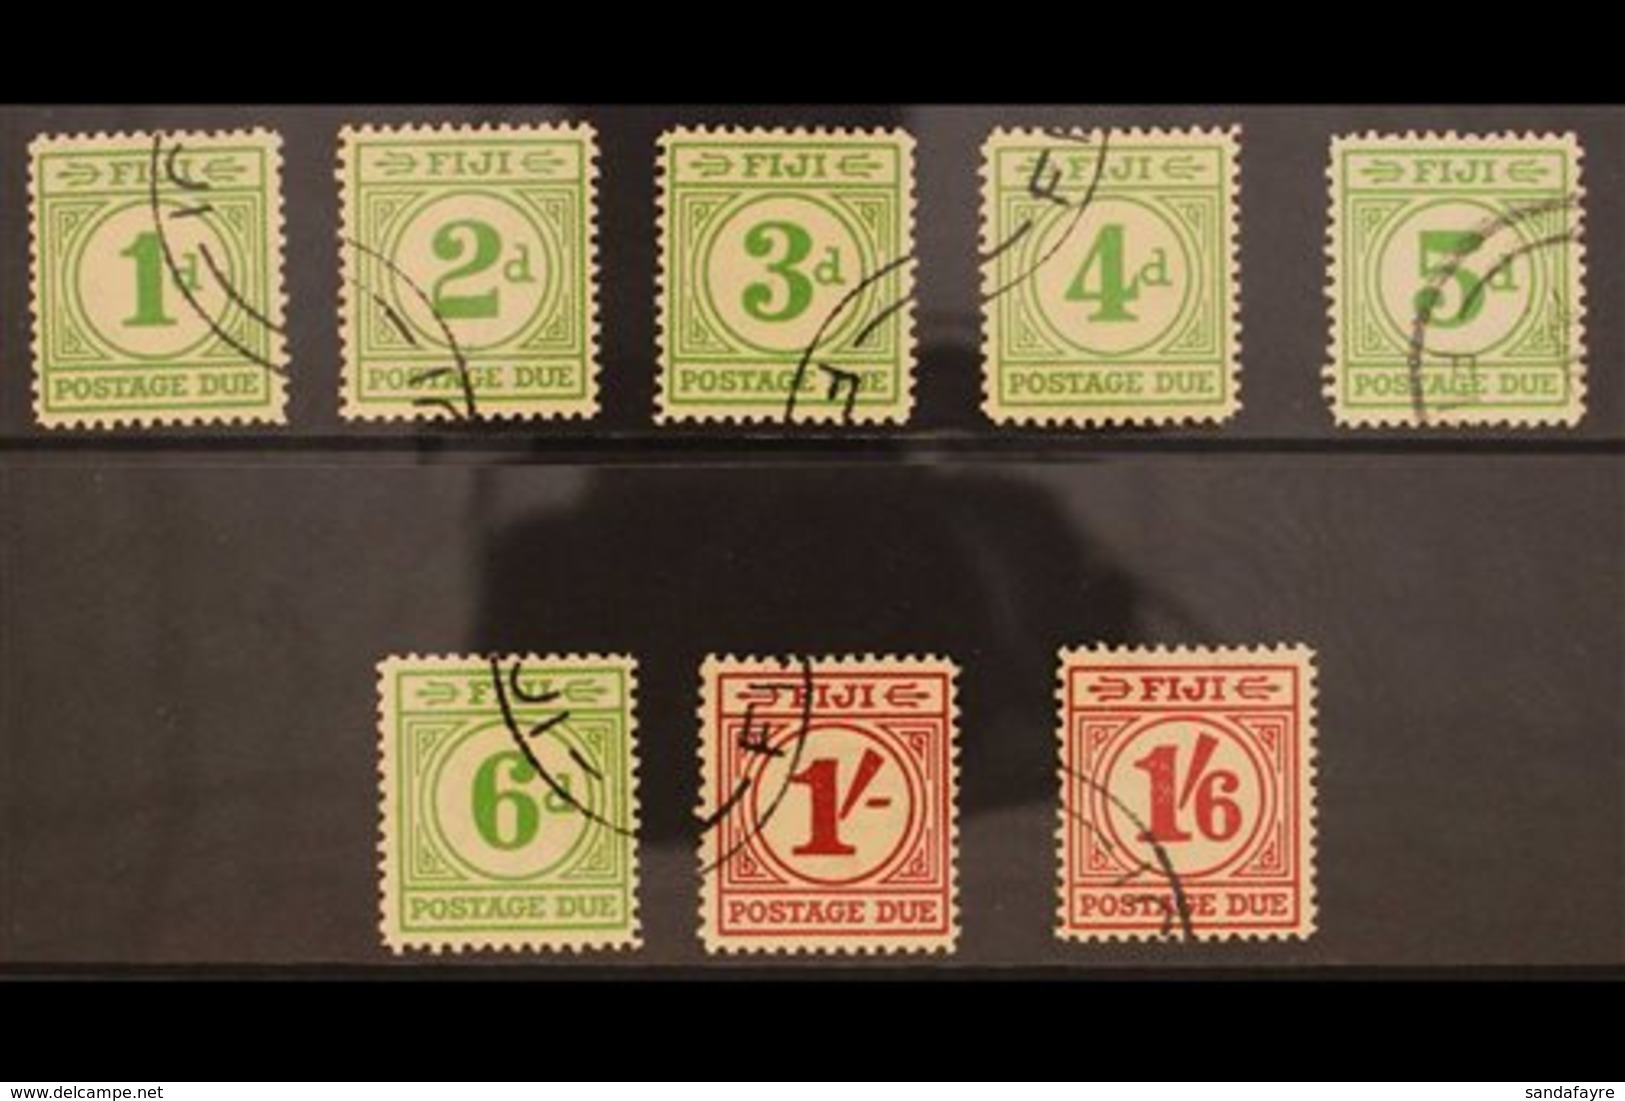 POSTAGE DUES 1940 Emerald And Carmine Set, SG D11/17, Very Fine Used. Cto As Usual, 1s And 1s 6d With RPS Certificates.  - Fidji (...-1970)